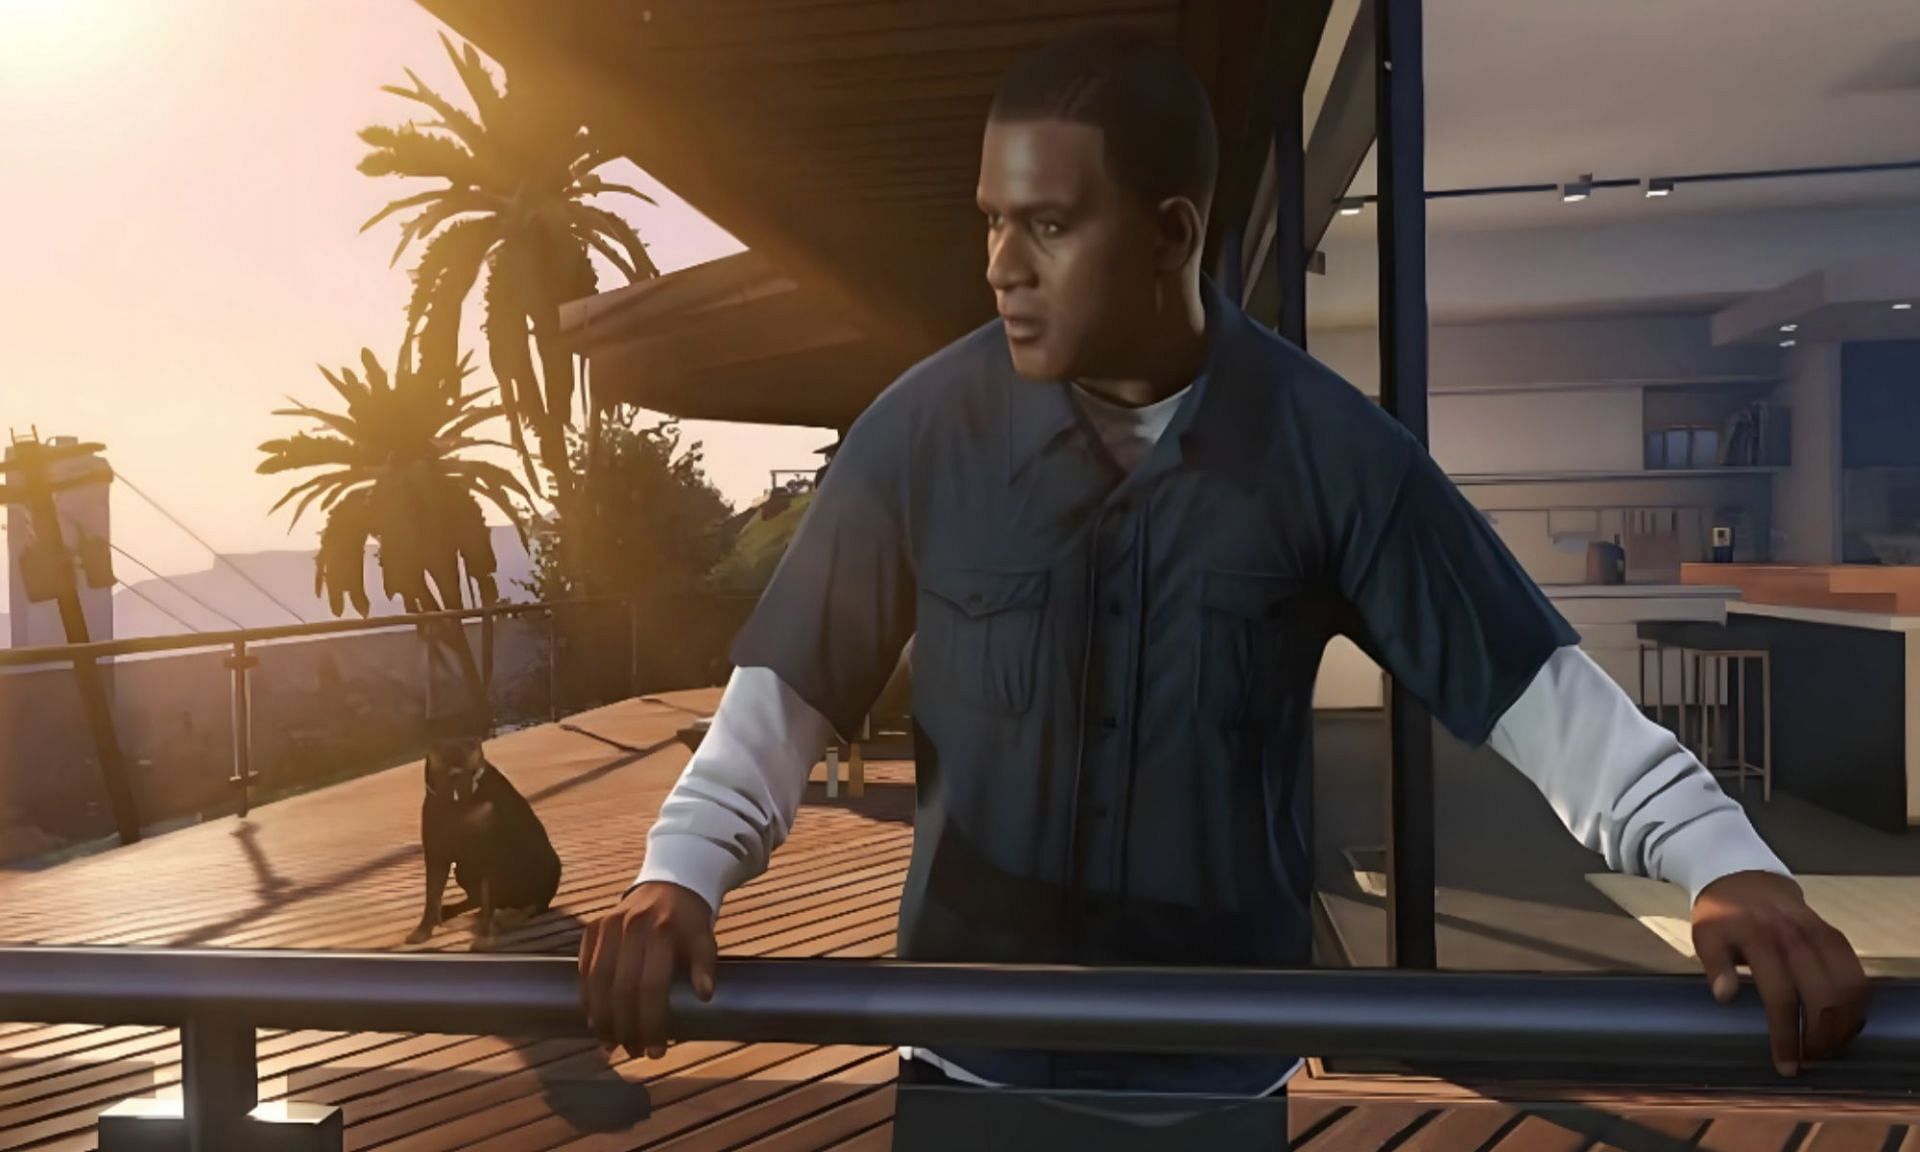 Franklin living the good life in his mansion (Image via Rockstar Games)